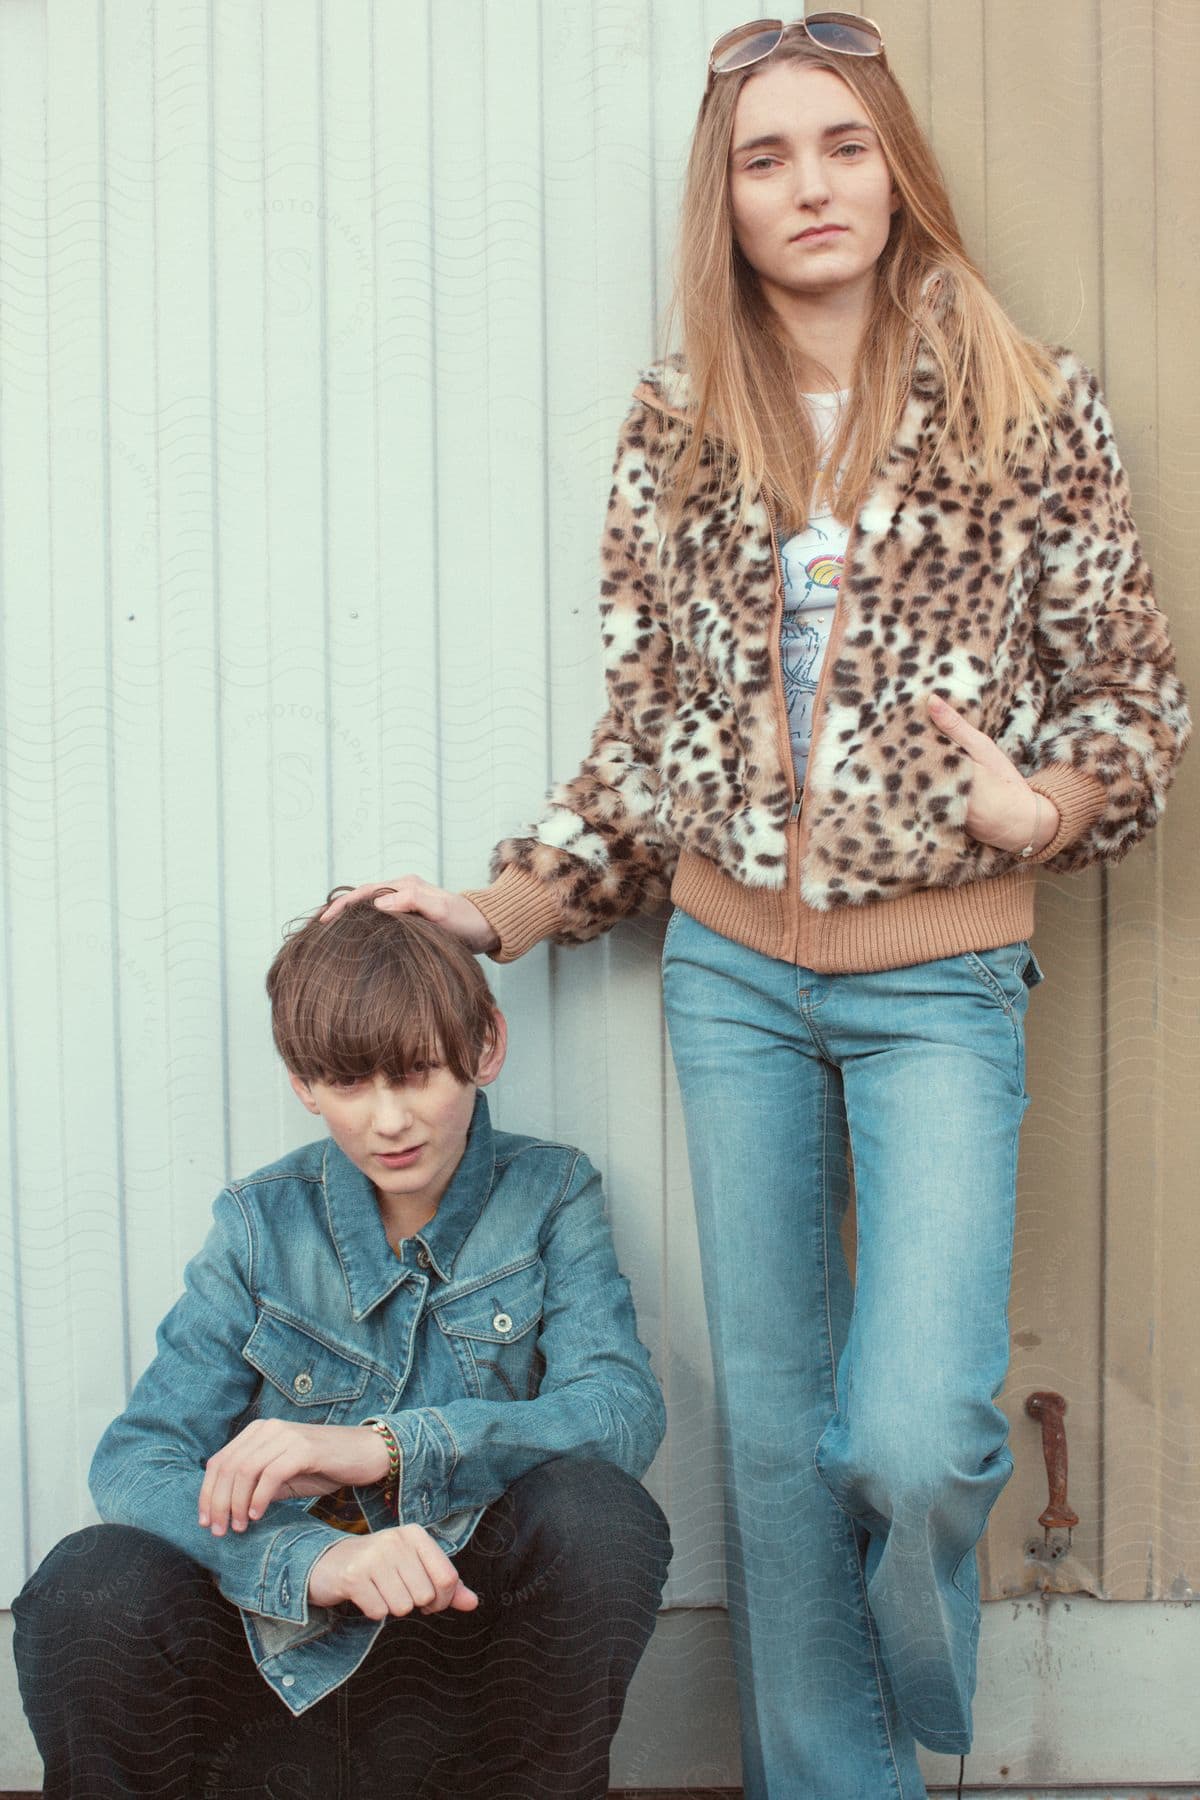 Stock photo of teenage girl modeling animal print jacket and blue jeans standing against panel siding building with male teenage model beside in blue jean jacket